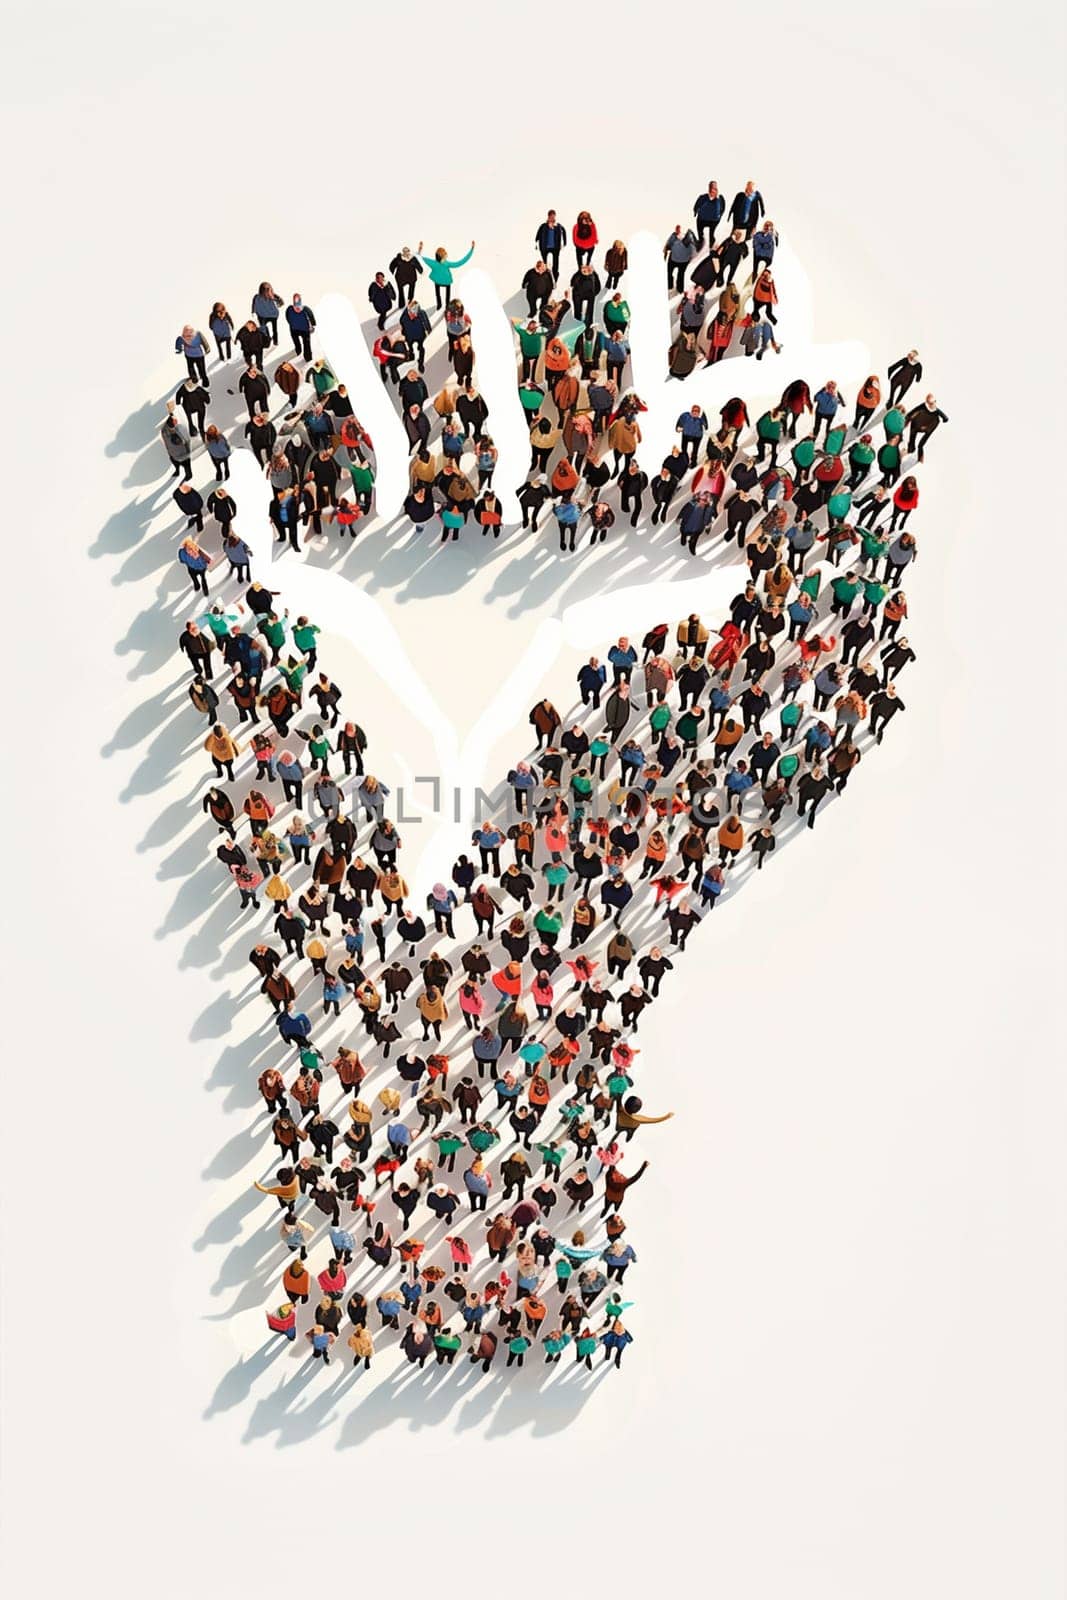 A group of individuals standing together to create a human hand shape.